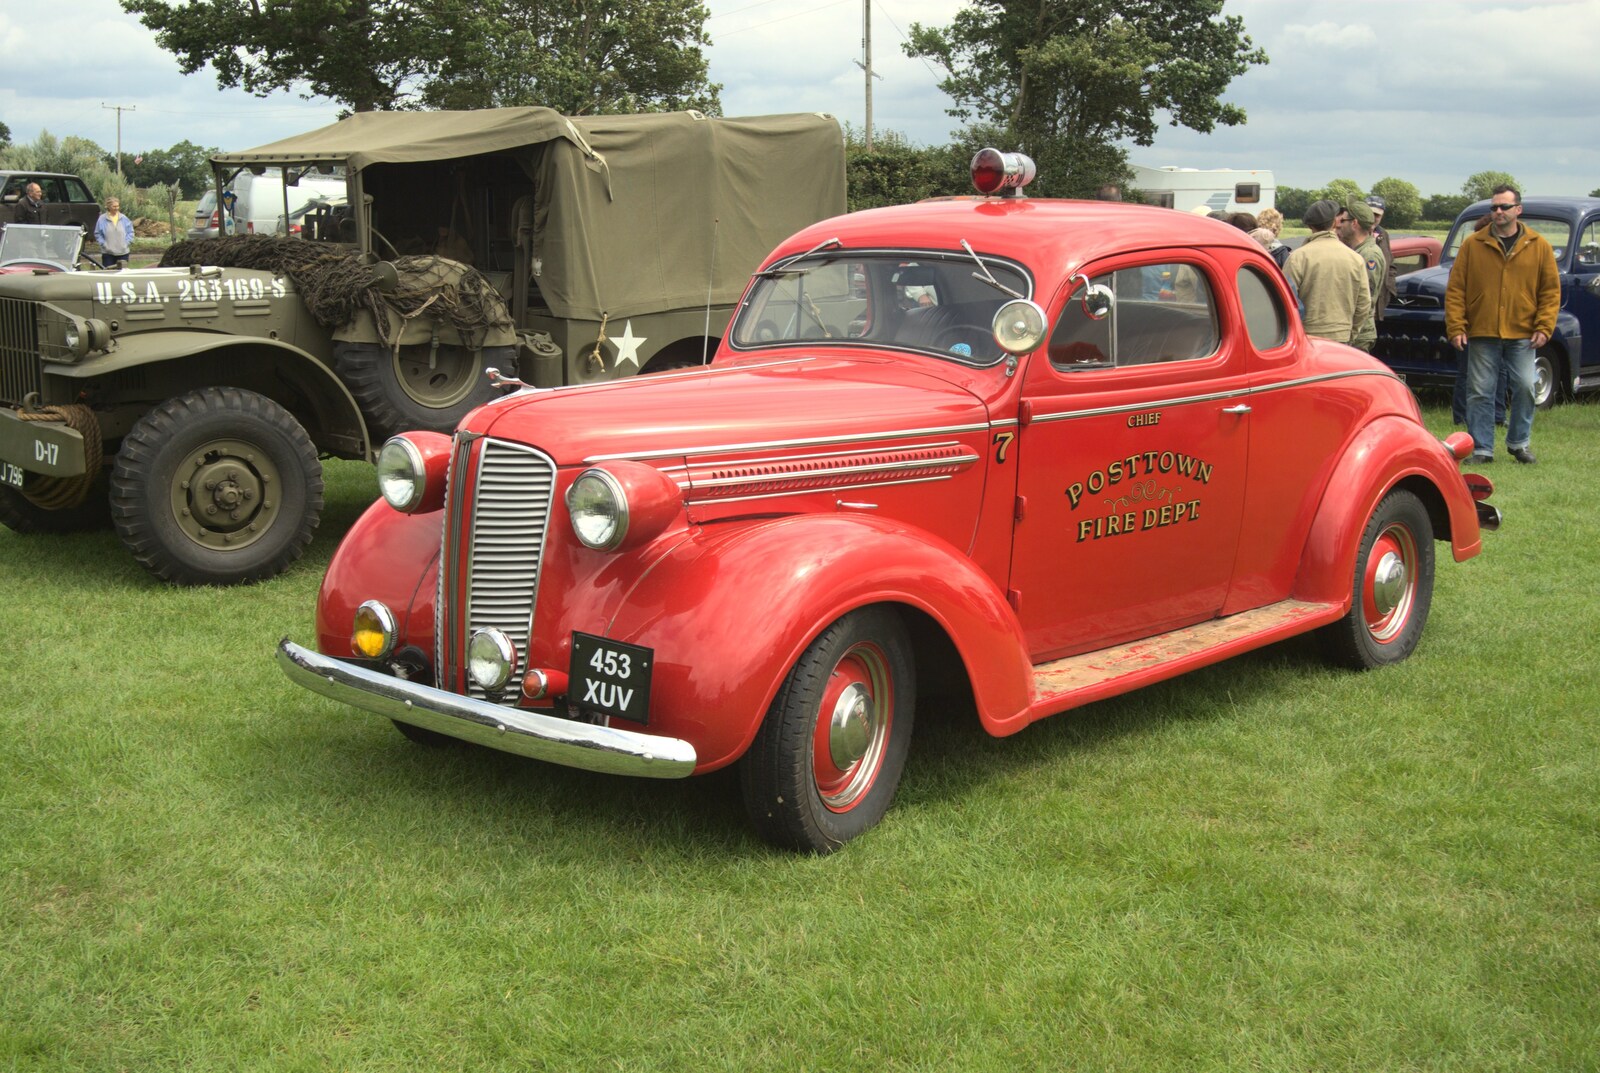 A bright red 'Posttown Fire Dept' car from Maurice's Mustang Hangar Dance, Hardwick Airfield, Norfolk - 16th July 2011